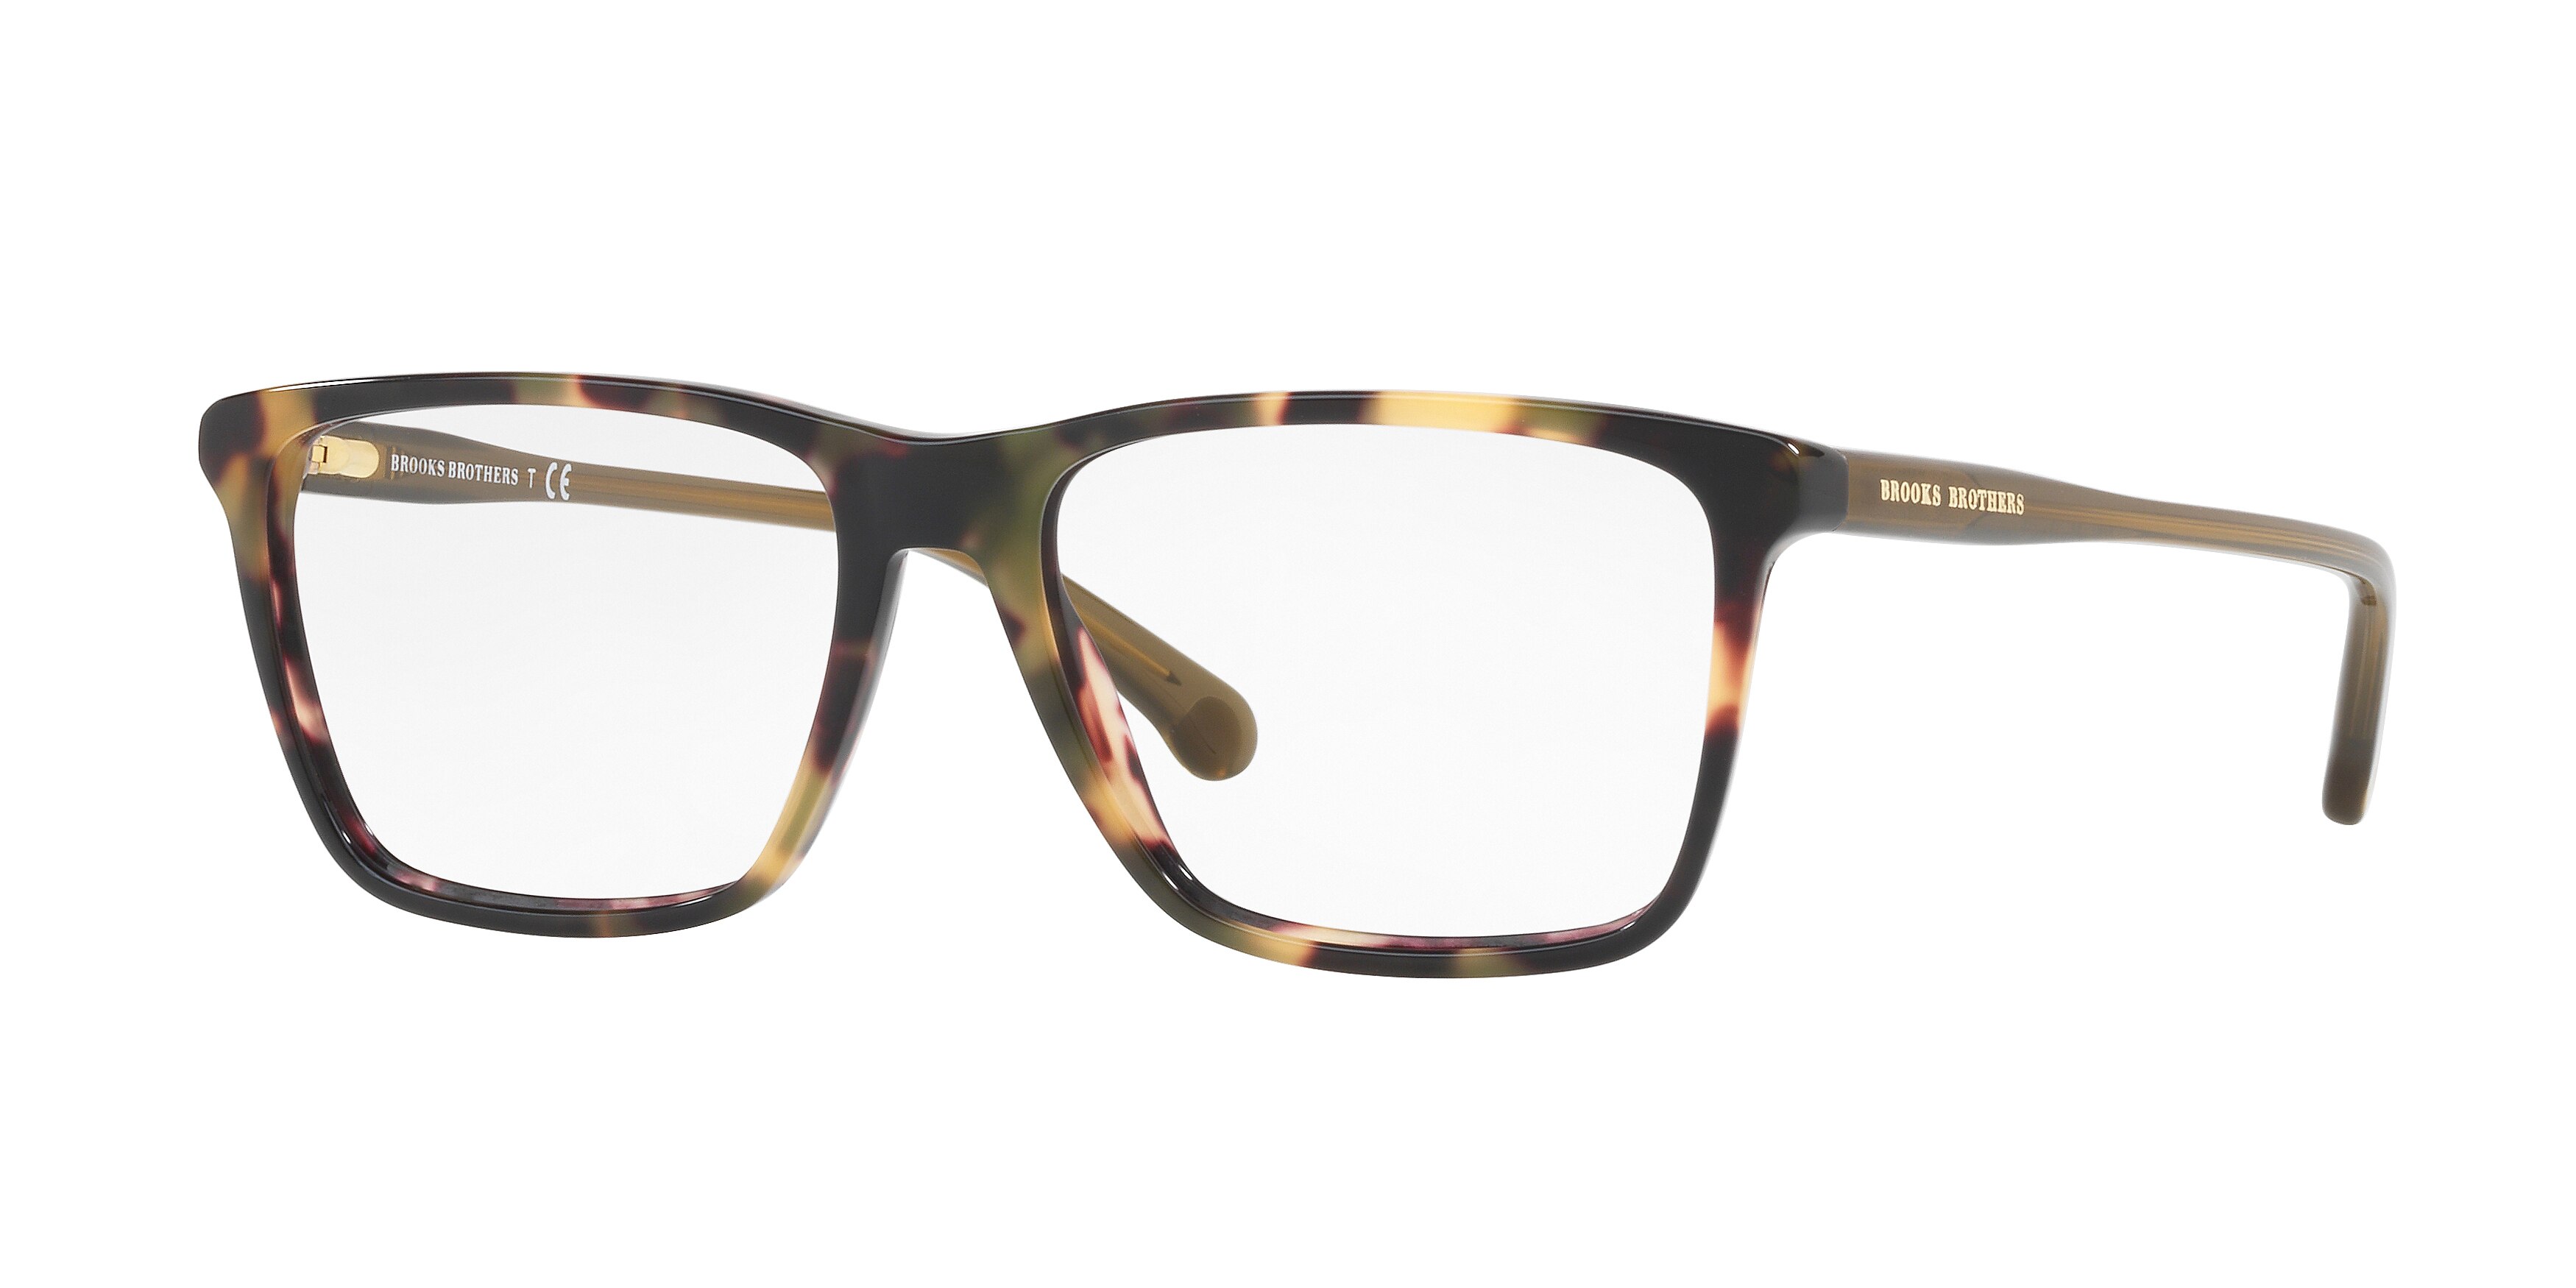  clear/retro tortoiseolive translcnt